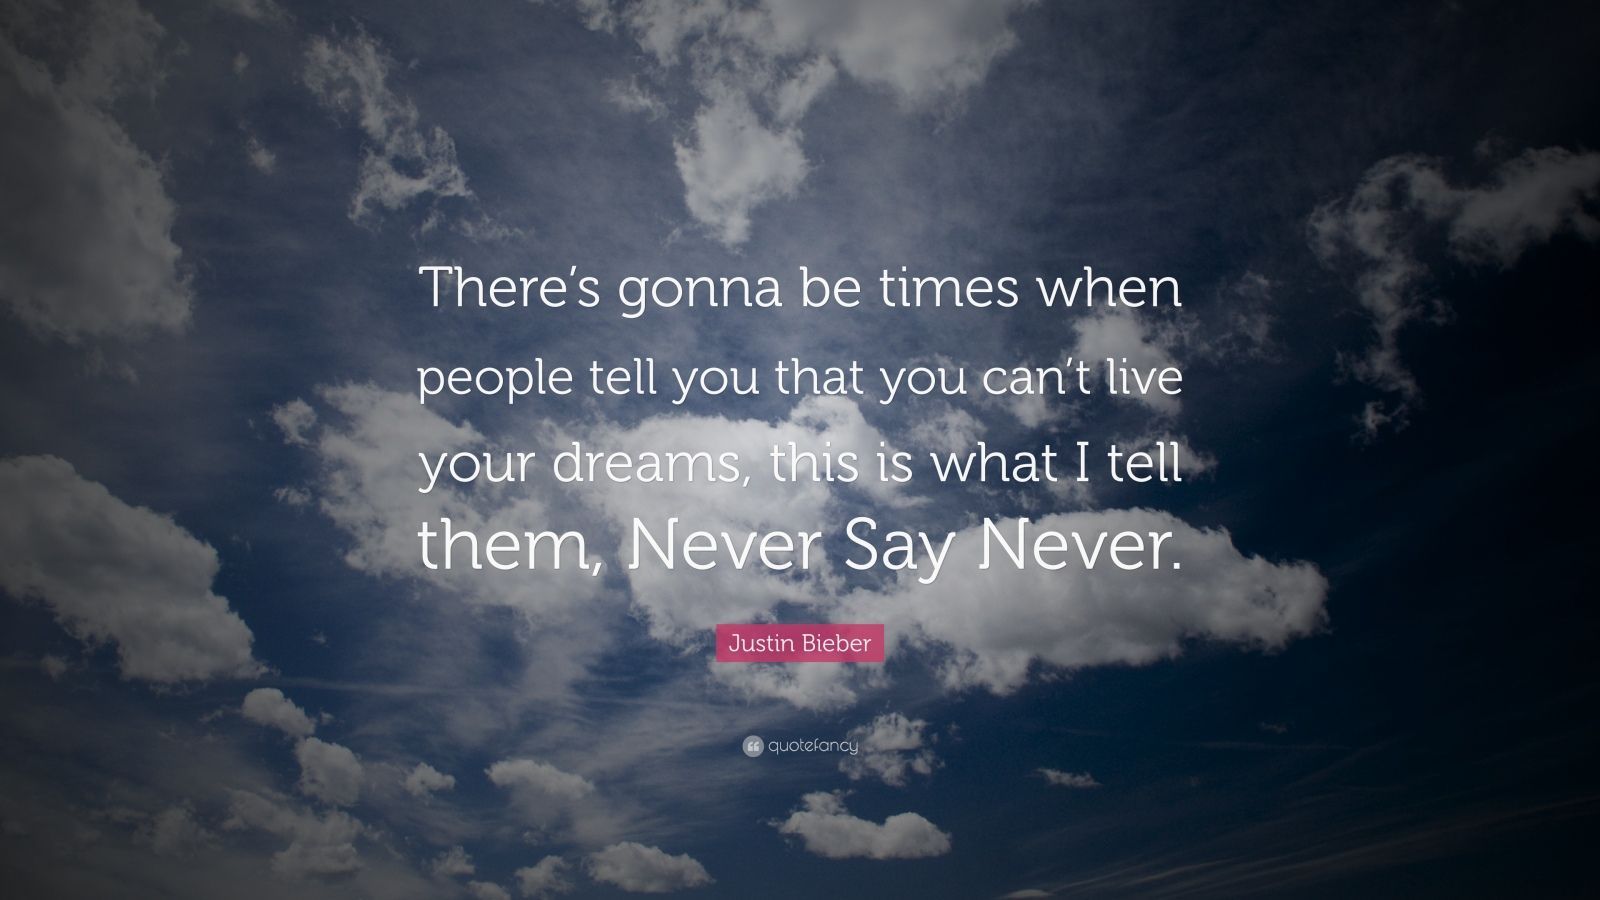 Justin Bieber Quote: “There's gonna be times when people tell you that you can't live your dreams, this is what I tell them, Never Say Never.” (12 wallpaper)